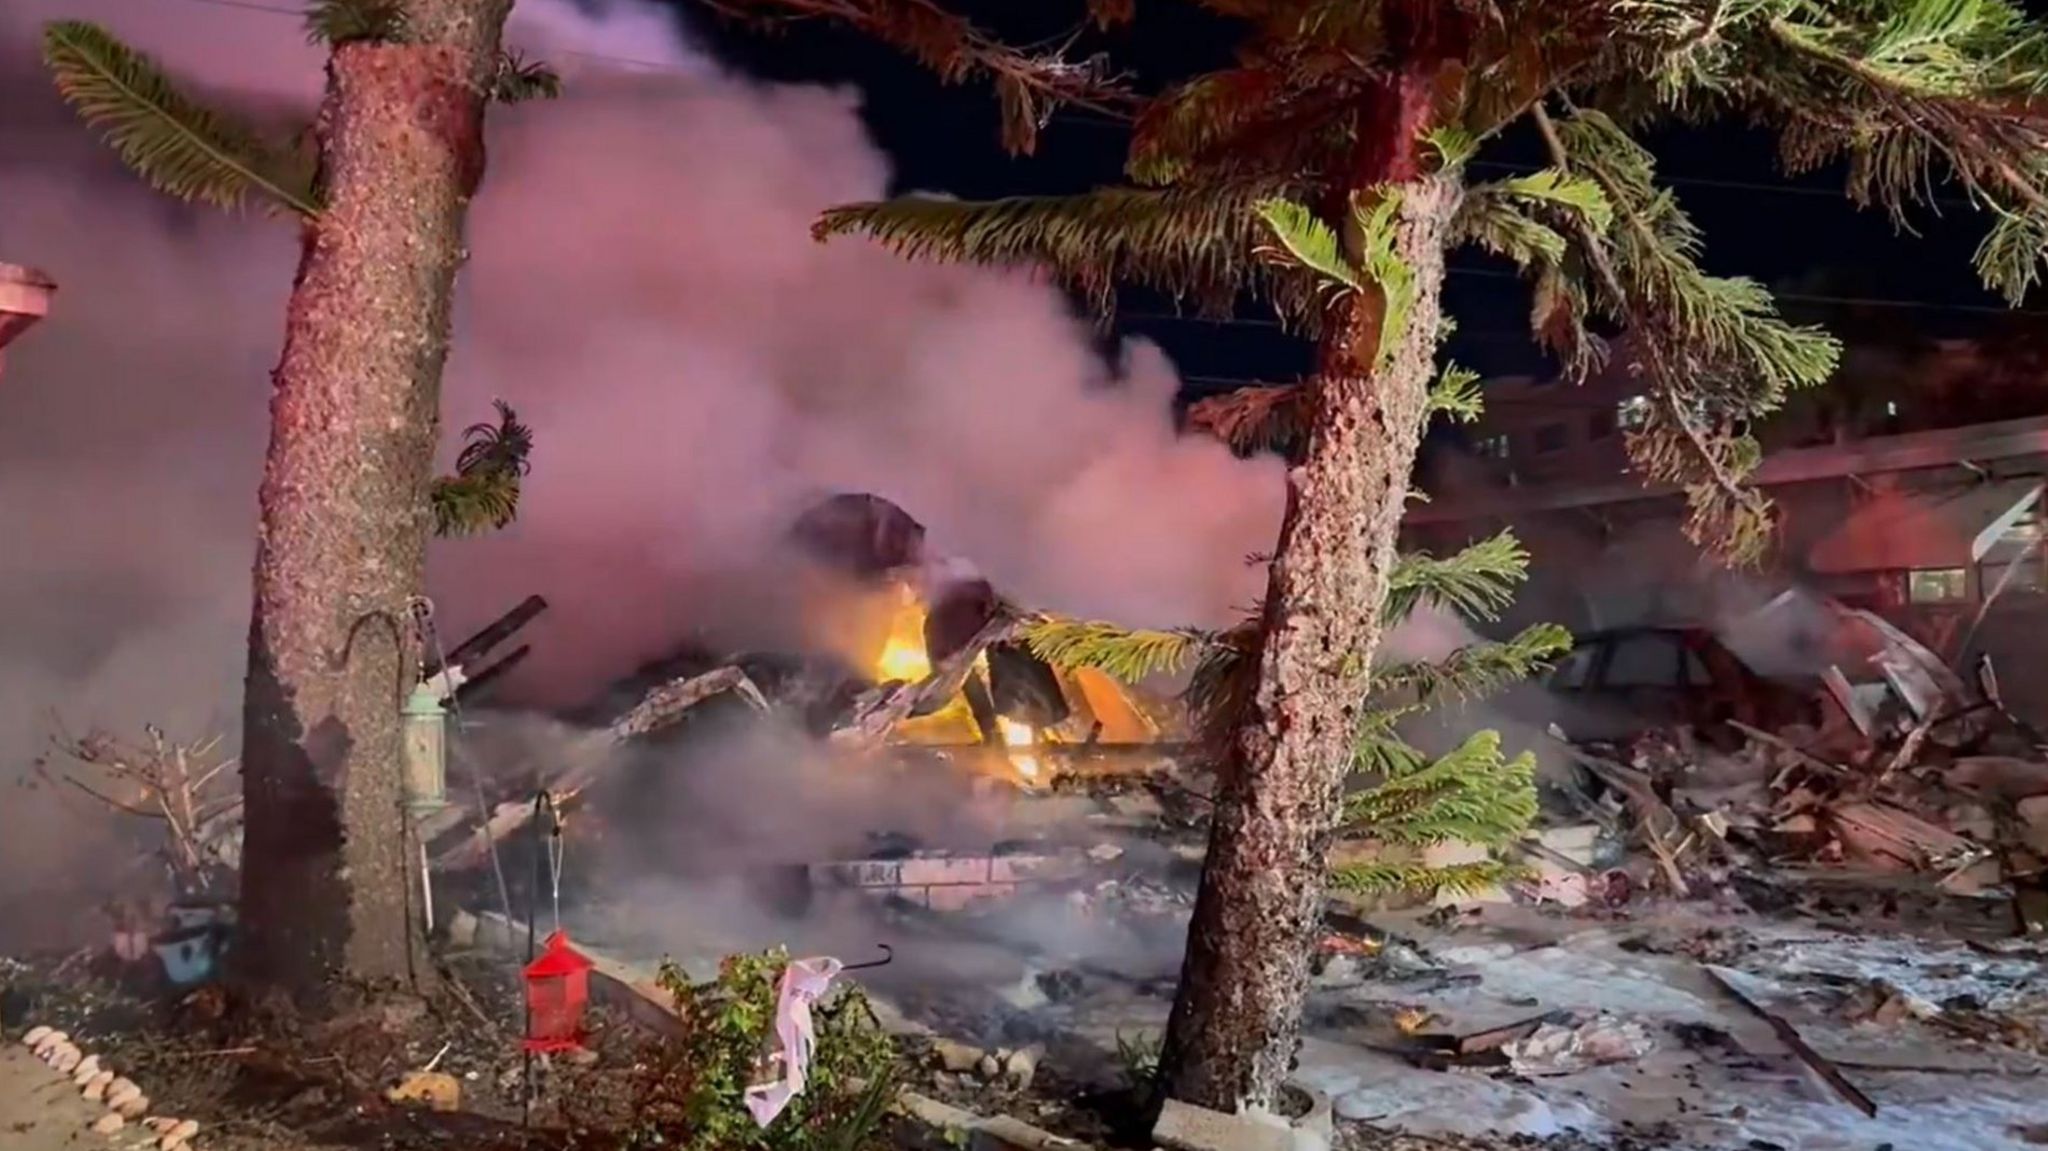 Video taken of the crash site shows fire and palm trees